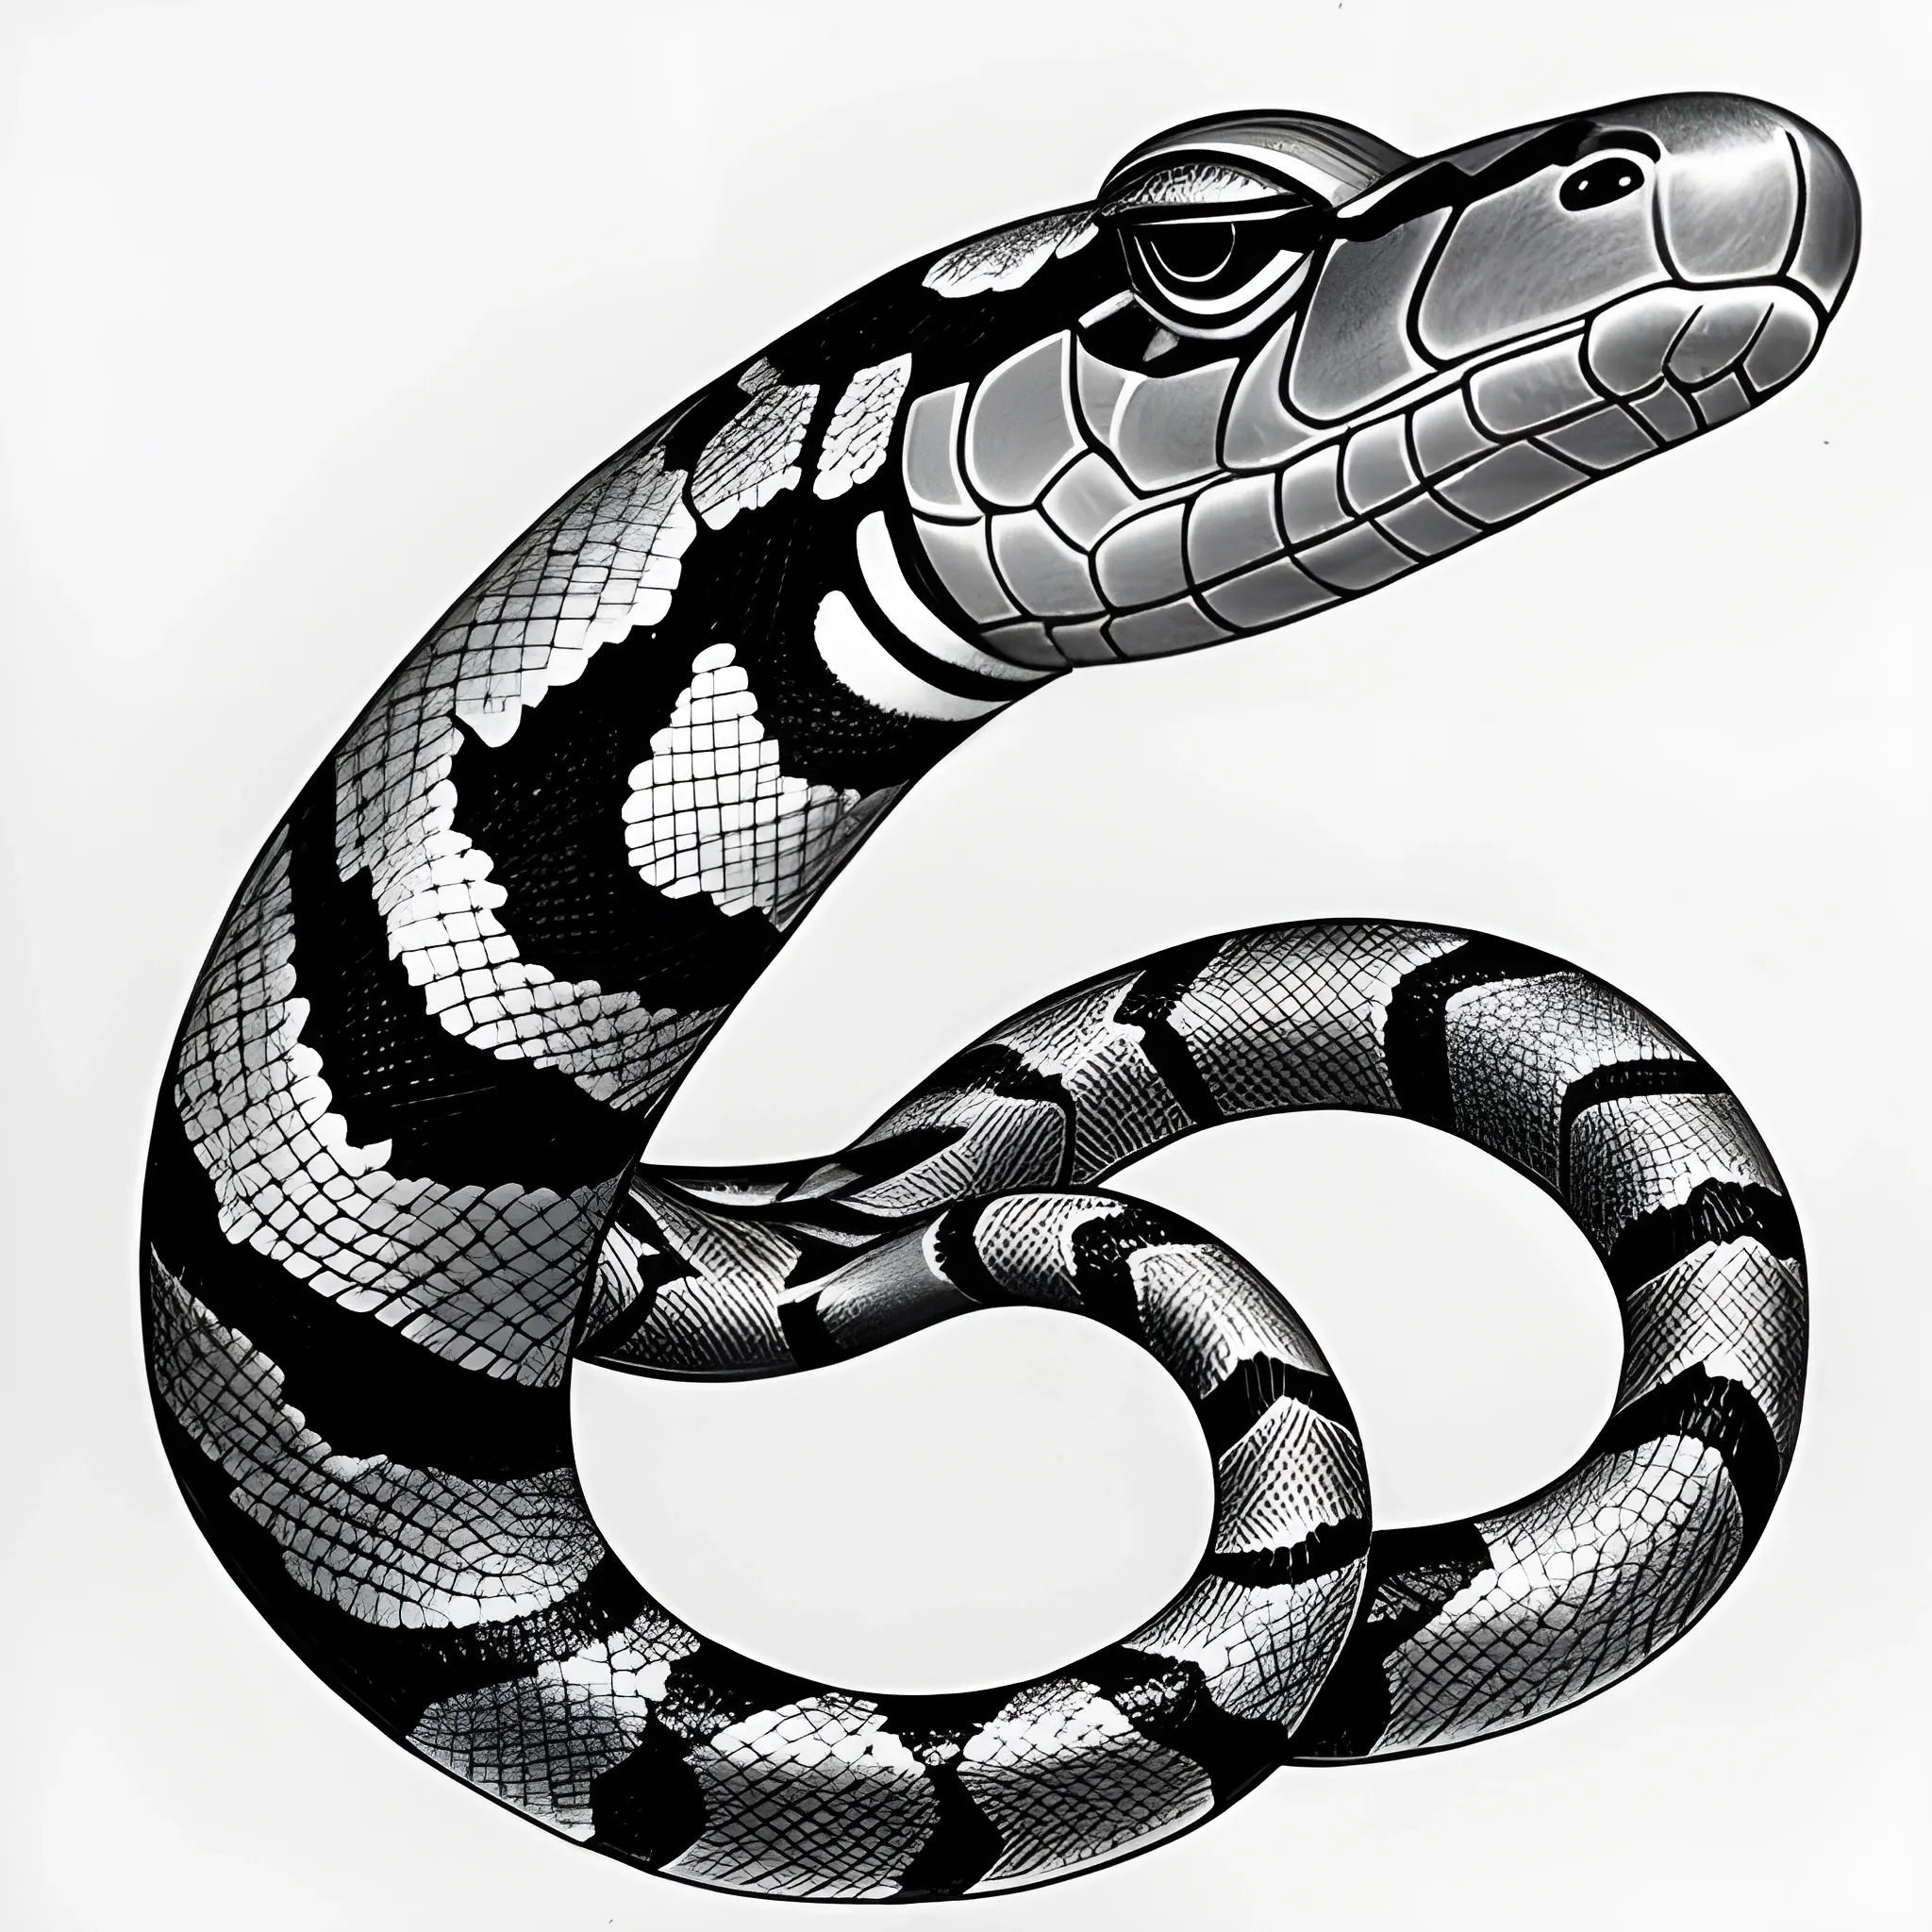 5,104 Cobra Sketch Royalty-Free Photos and Stock Images | Shutterstock